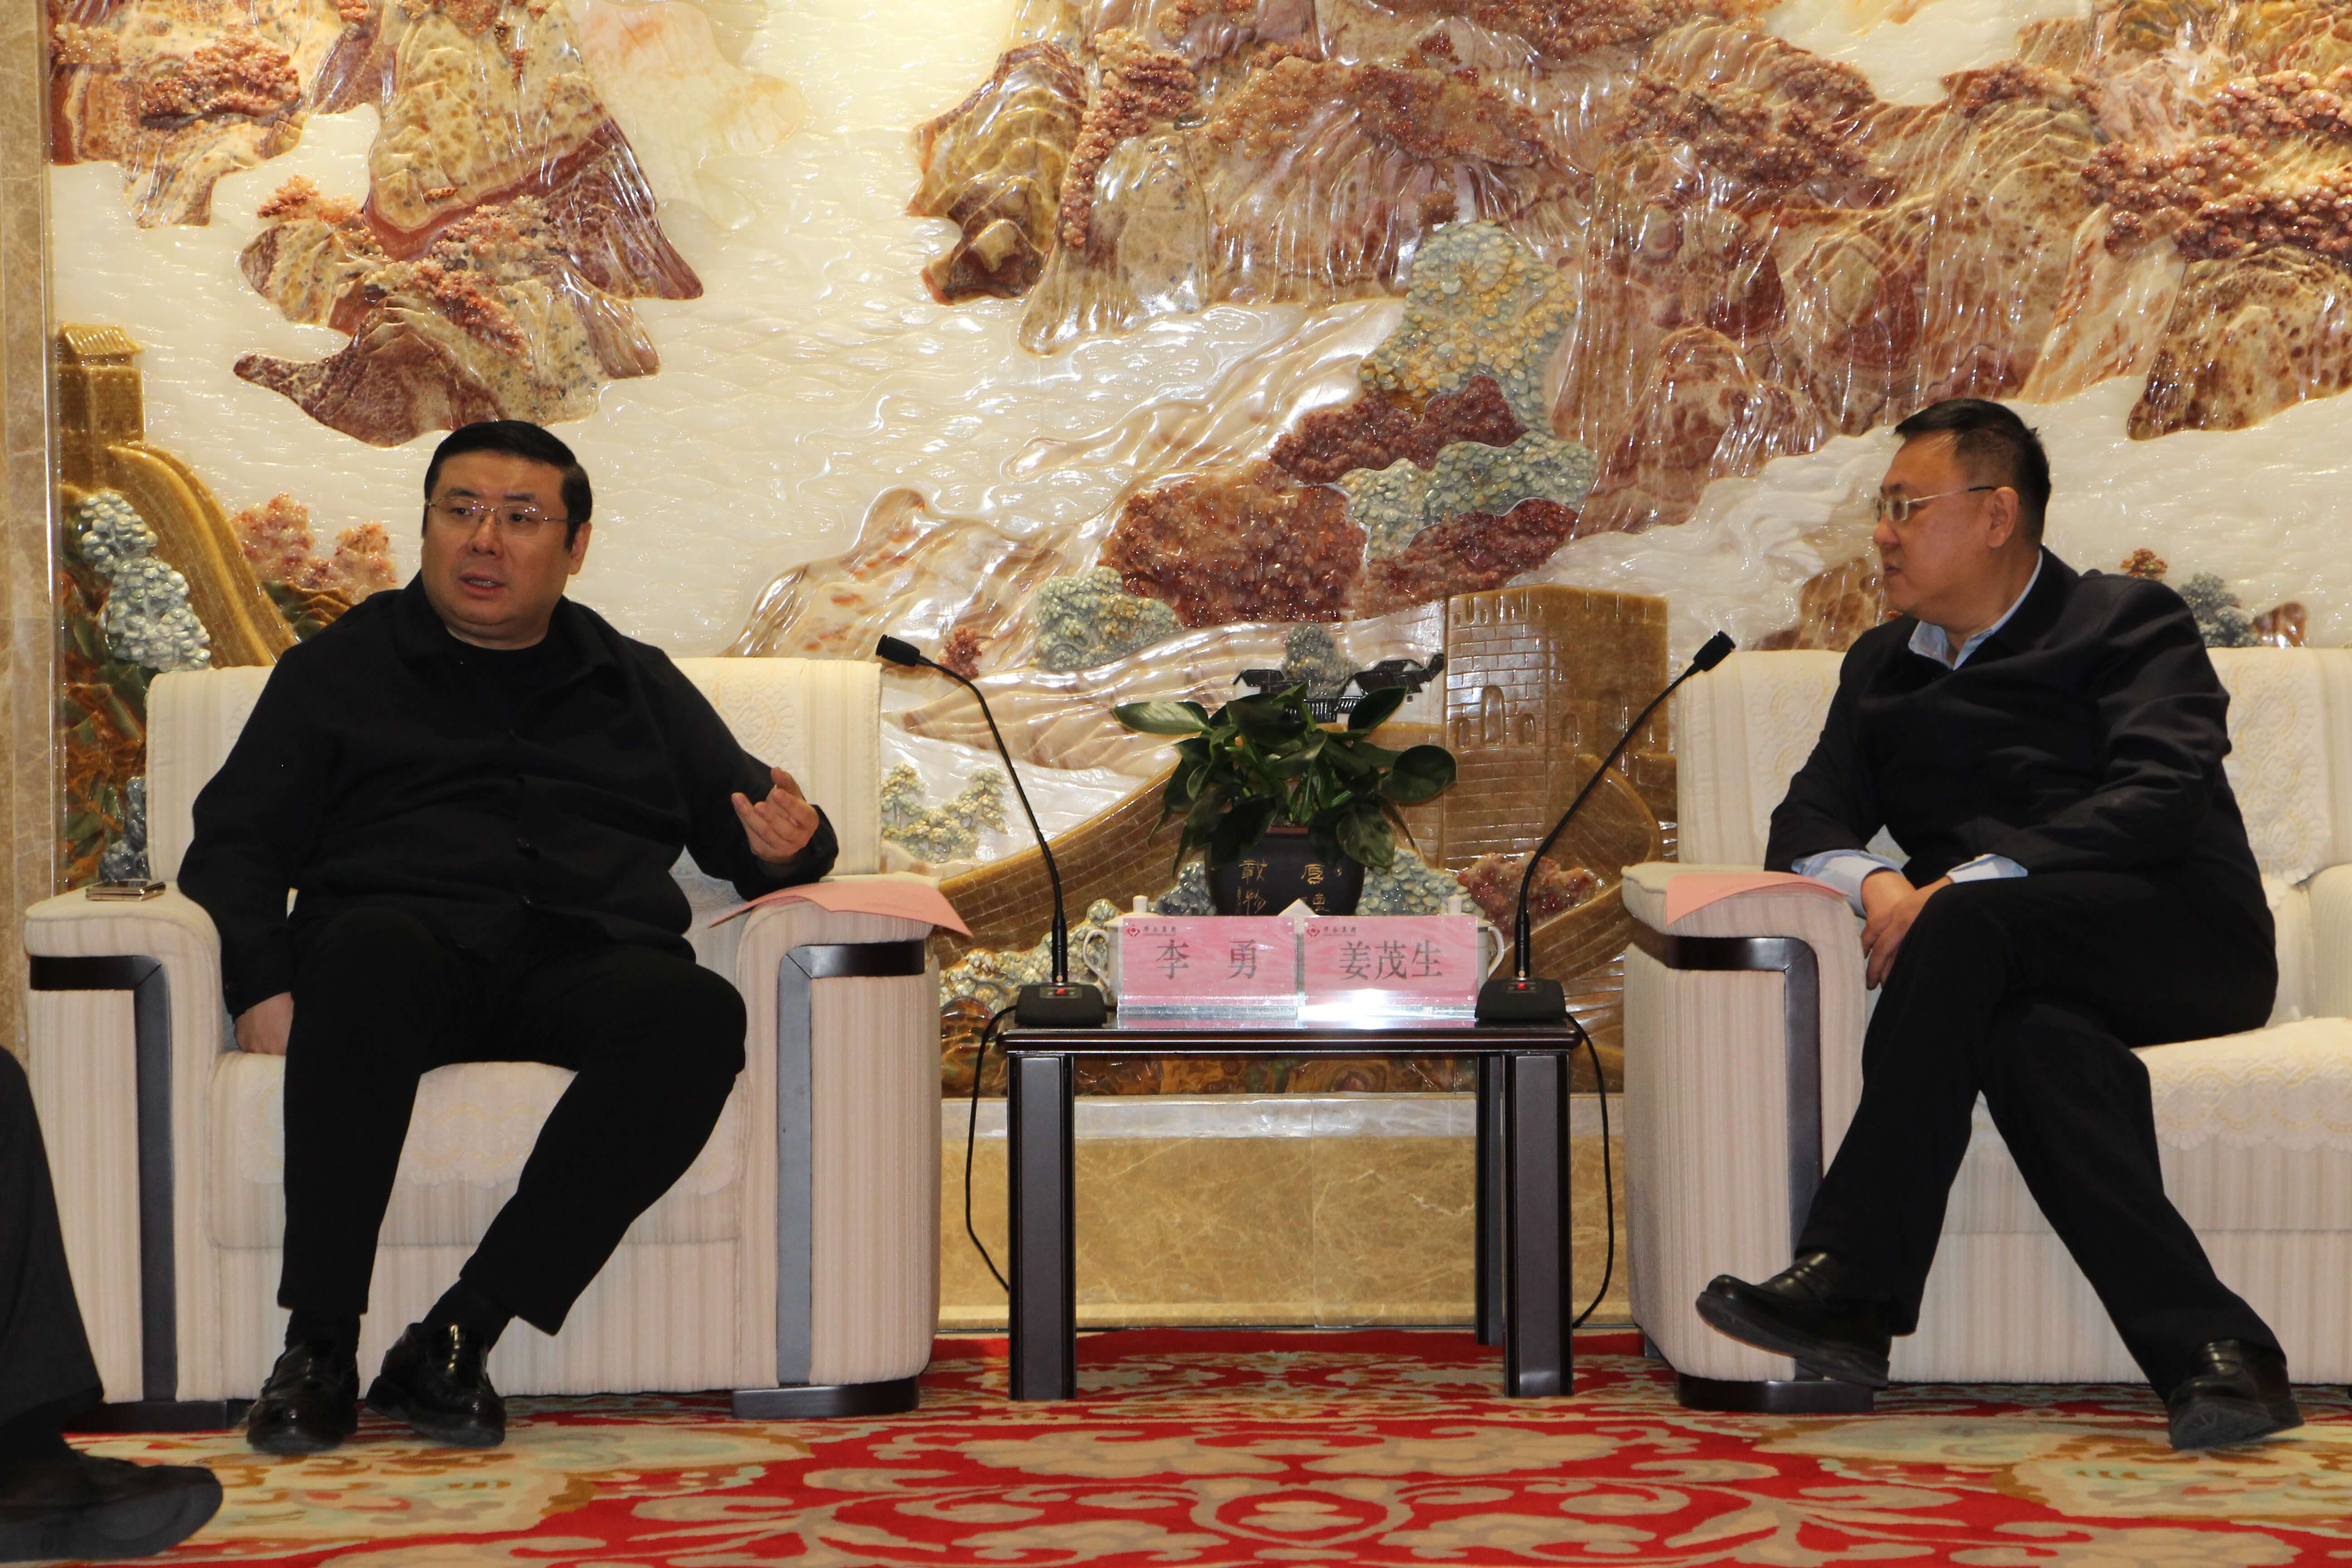 Chairman Li Yong Met with Jiang Maosheng, Mayor of Shahekou District, Dalian, Who Was Invited to Visit, and His Party, and Conducted Work Discussions